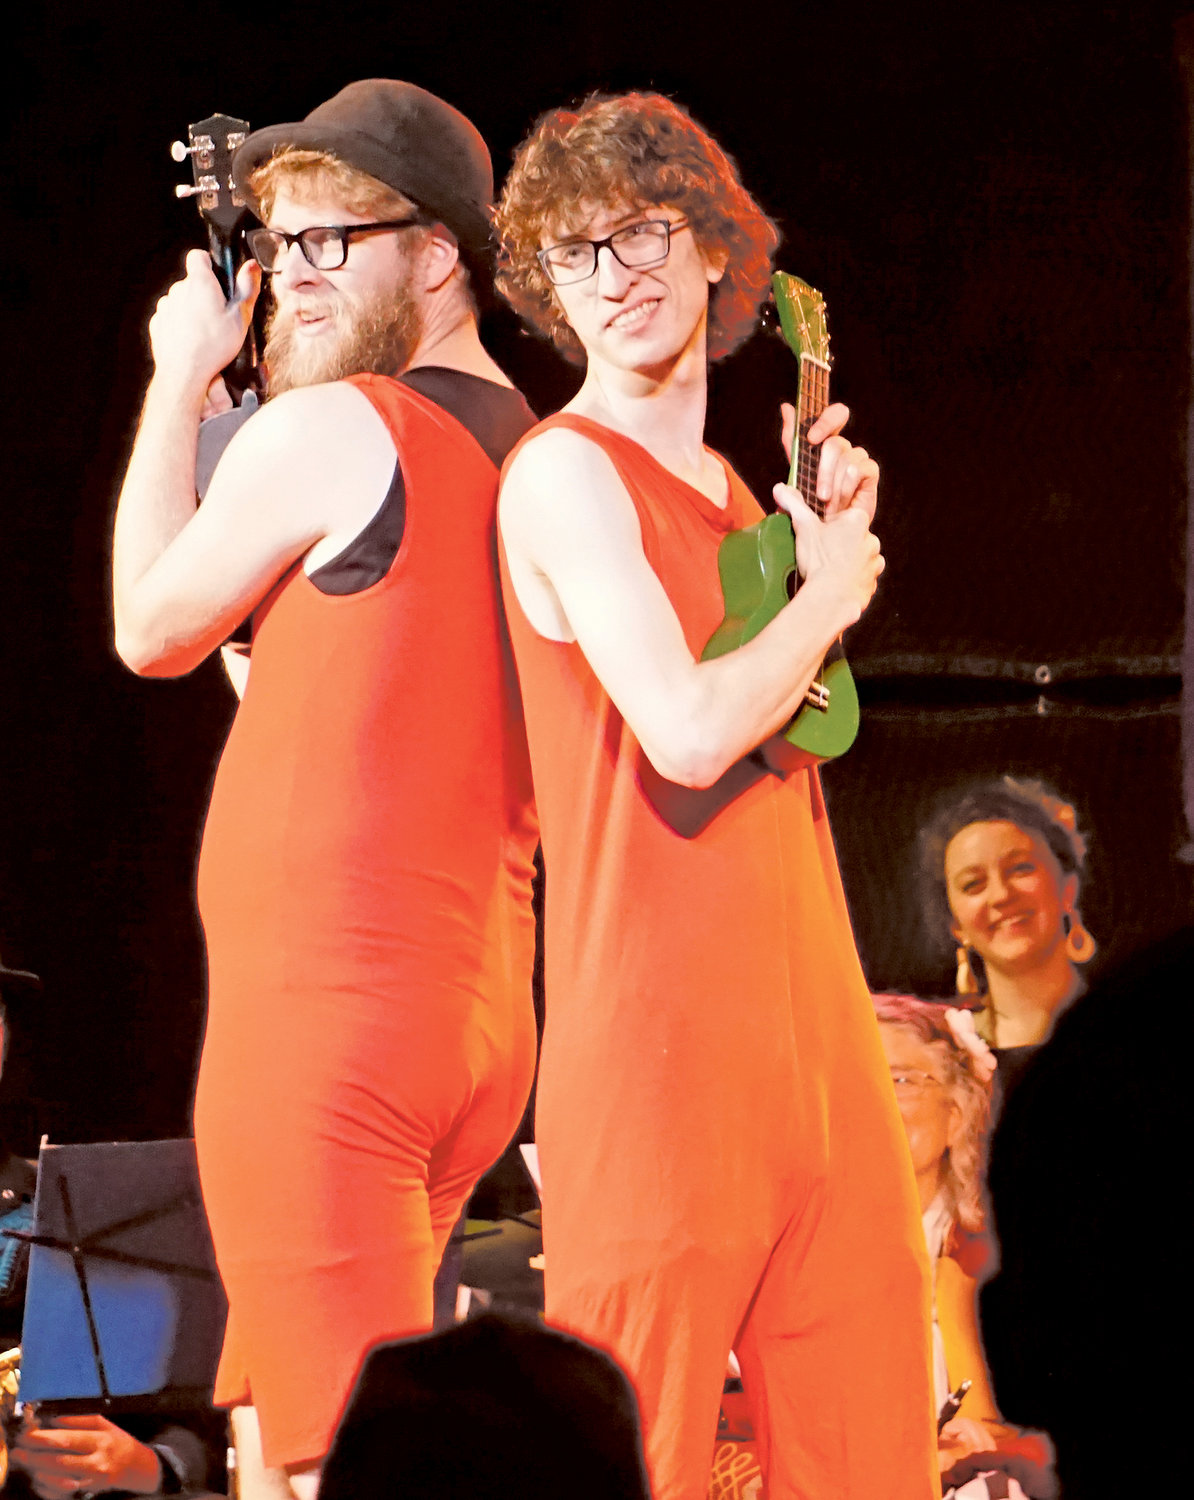 The juggling and musical duo, Strangely Jeremiah, perform with their ukuleles.